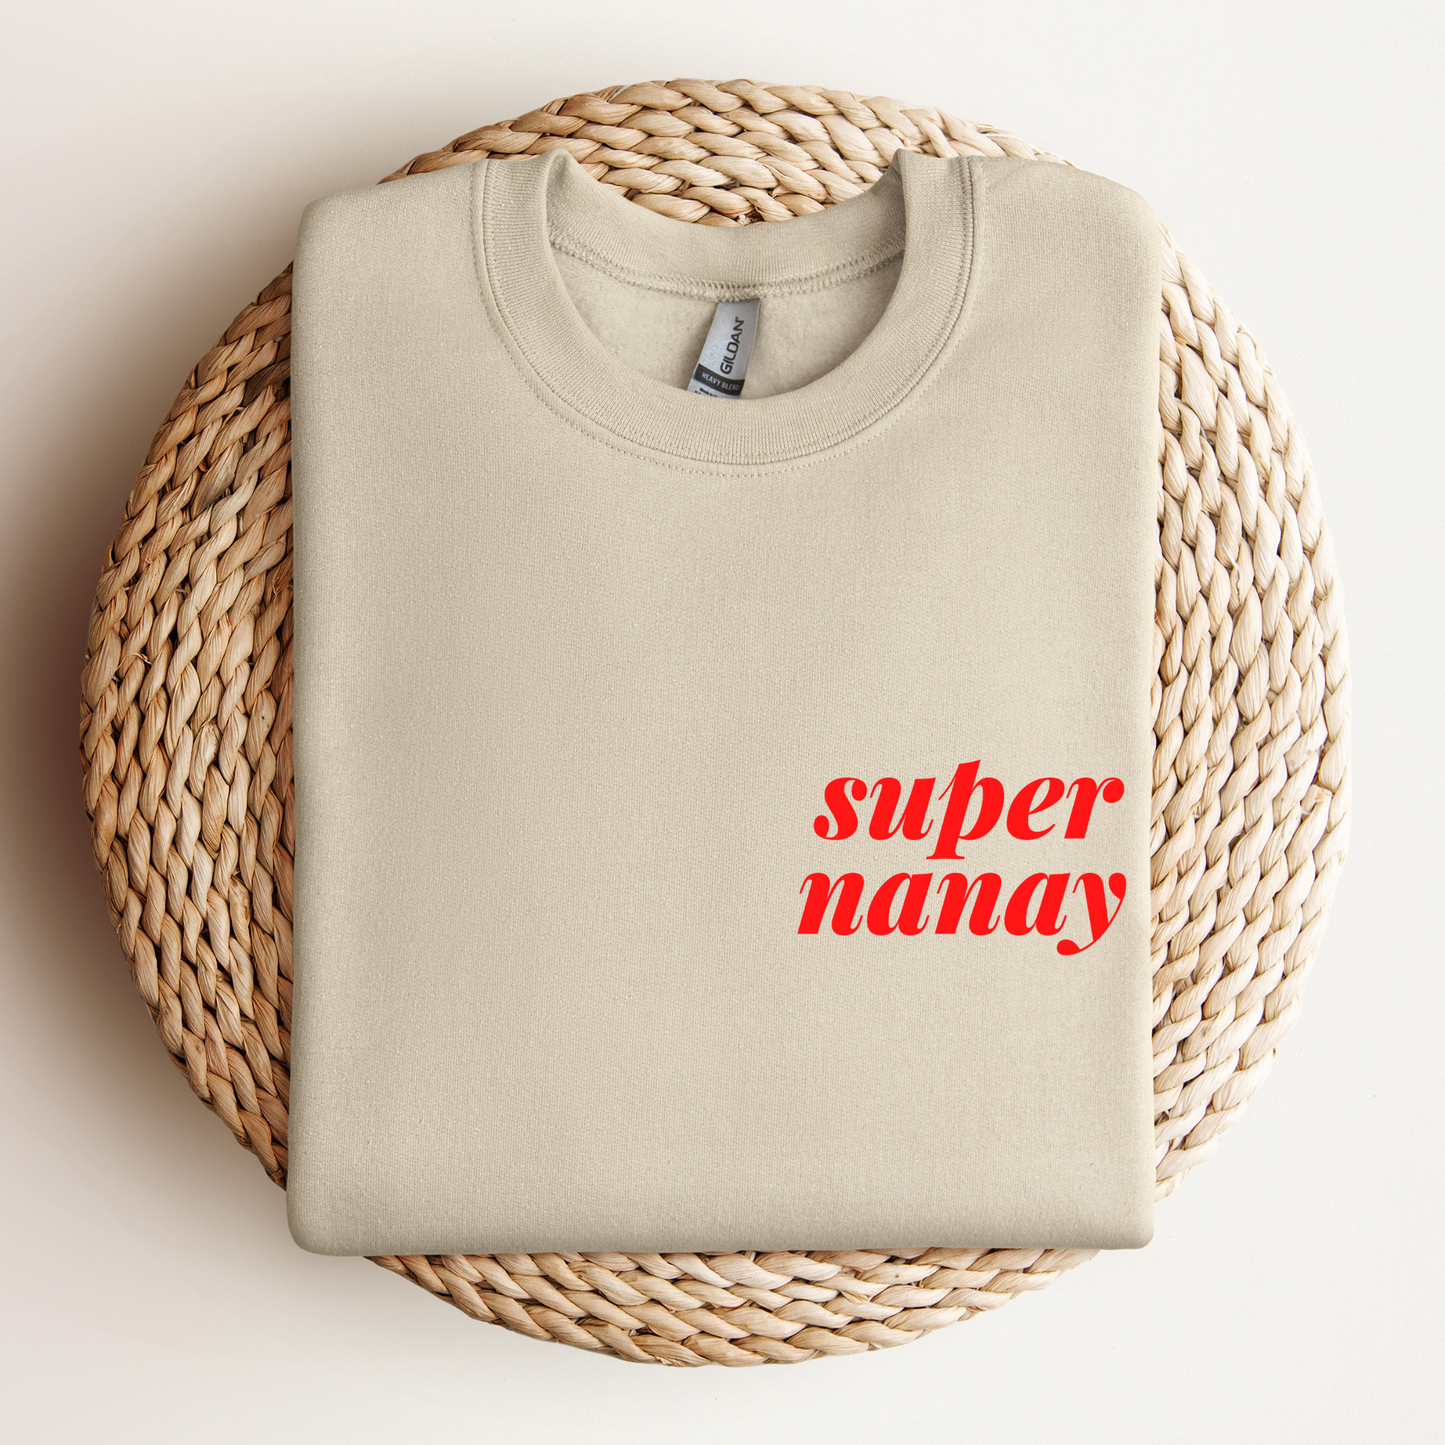 Filipino Sweatshirt Crew Neck Super Nanay Best Mom Embroidered Mother's Day Gift Image 2